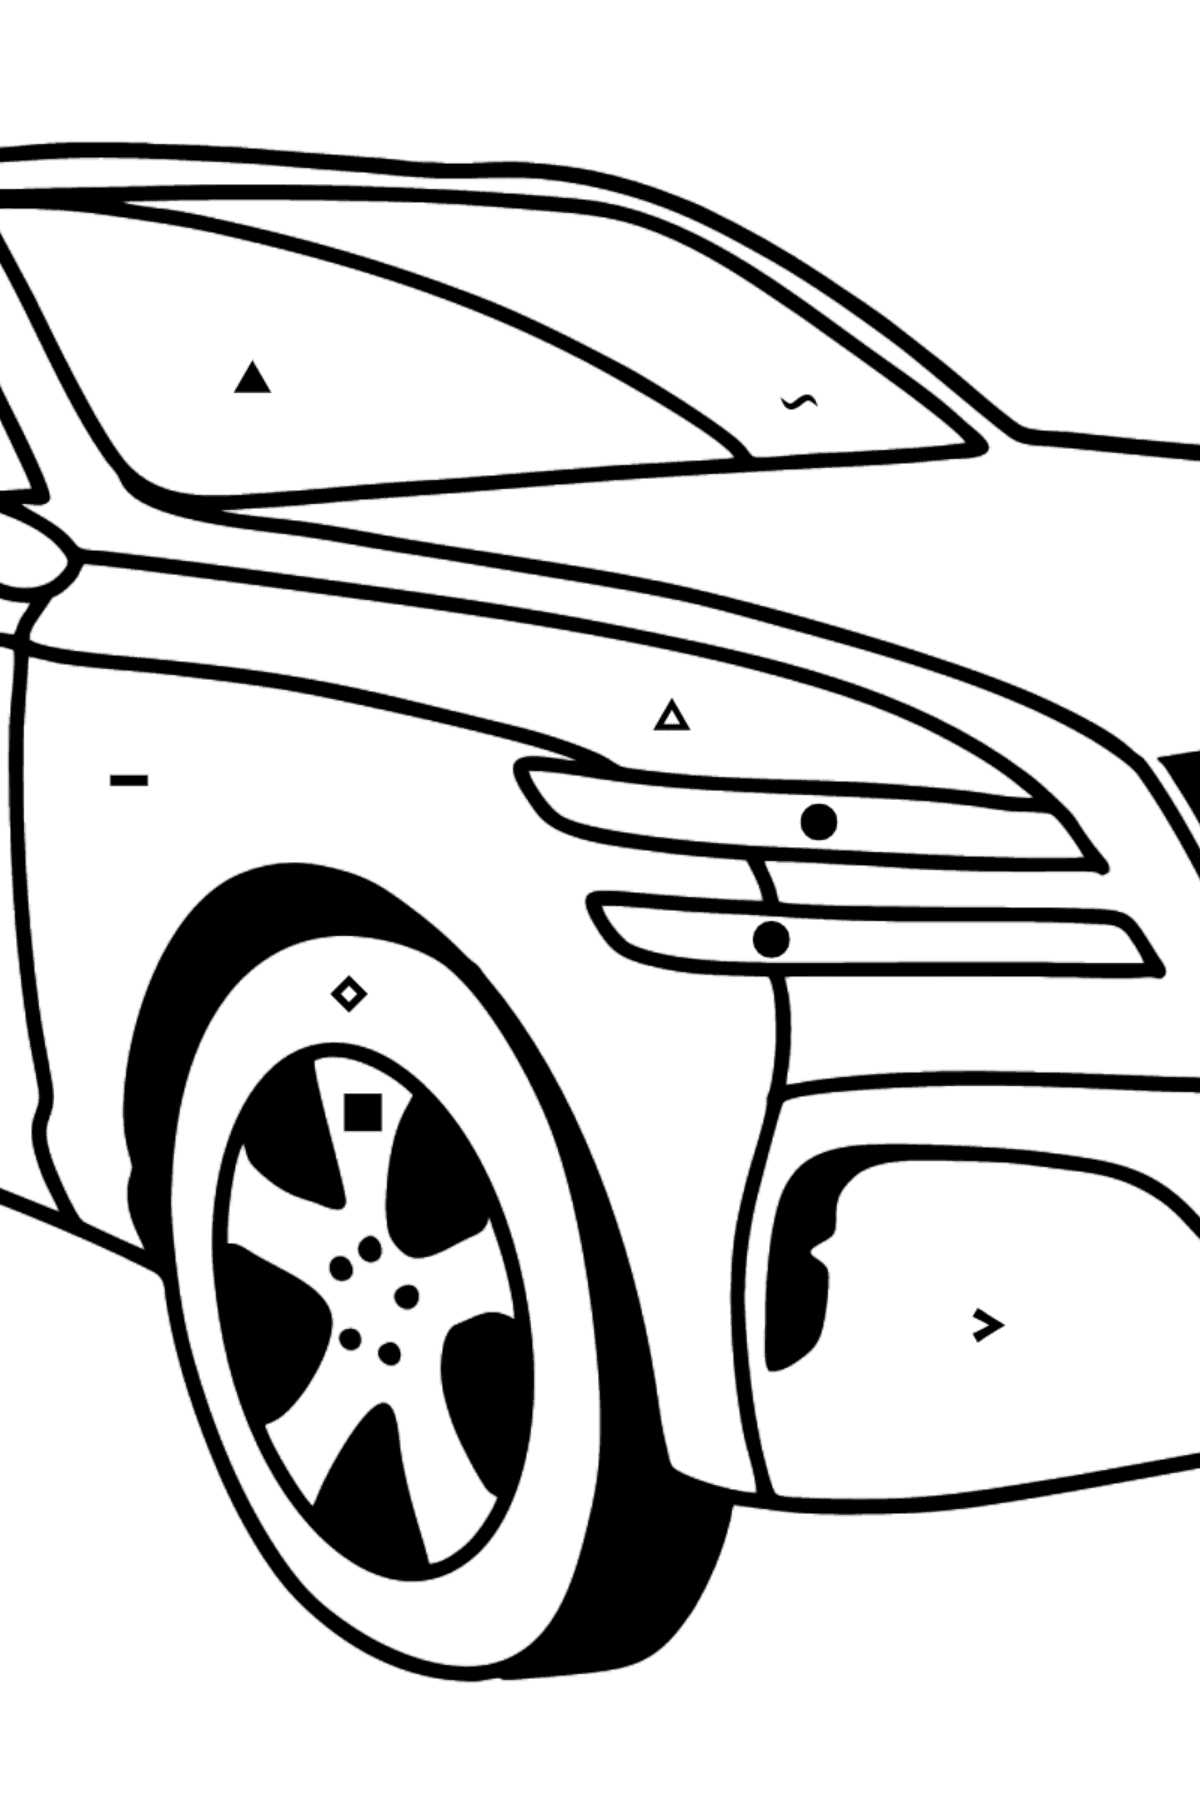 Genesis car coloring page - Coloring by Symbols for Kids